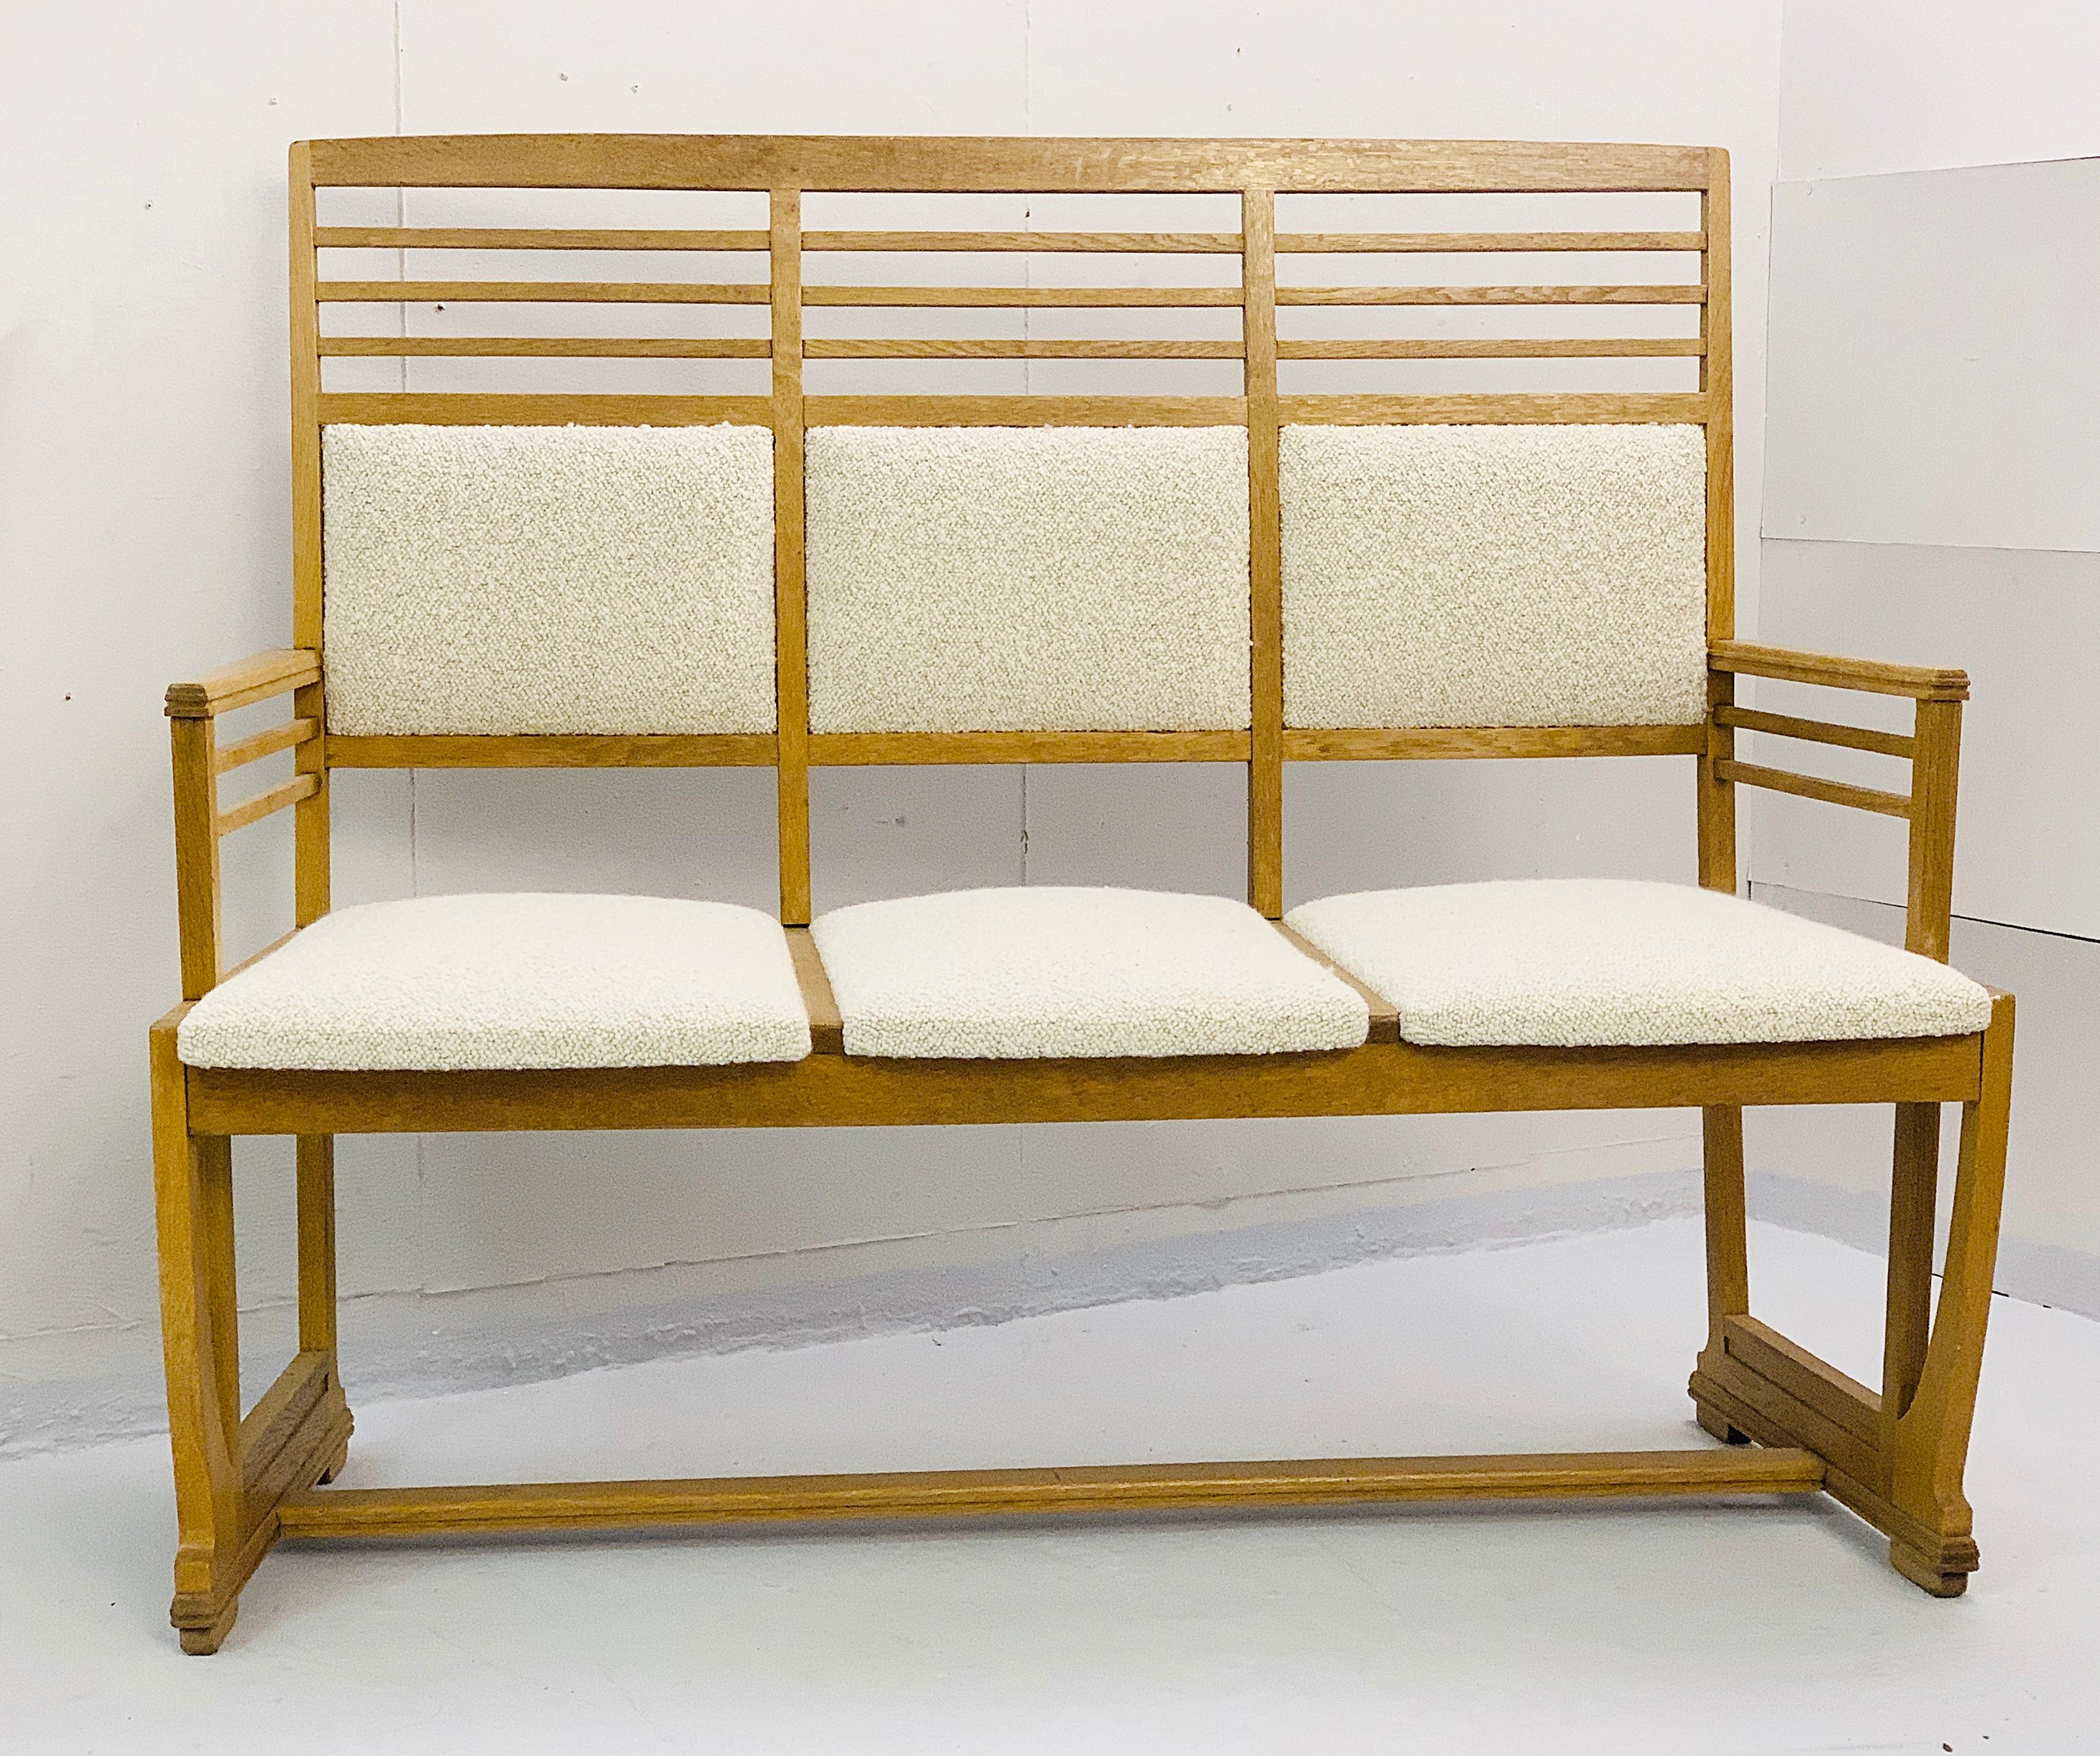 Bench attributed to Gustave Serrurier-Bovy - New upholstery.